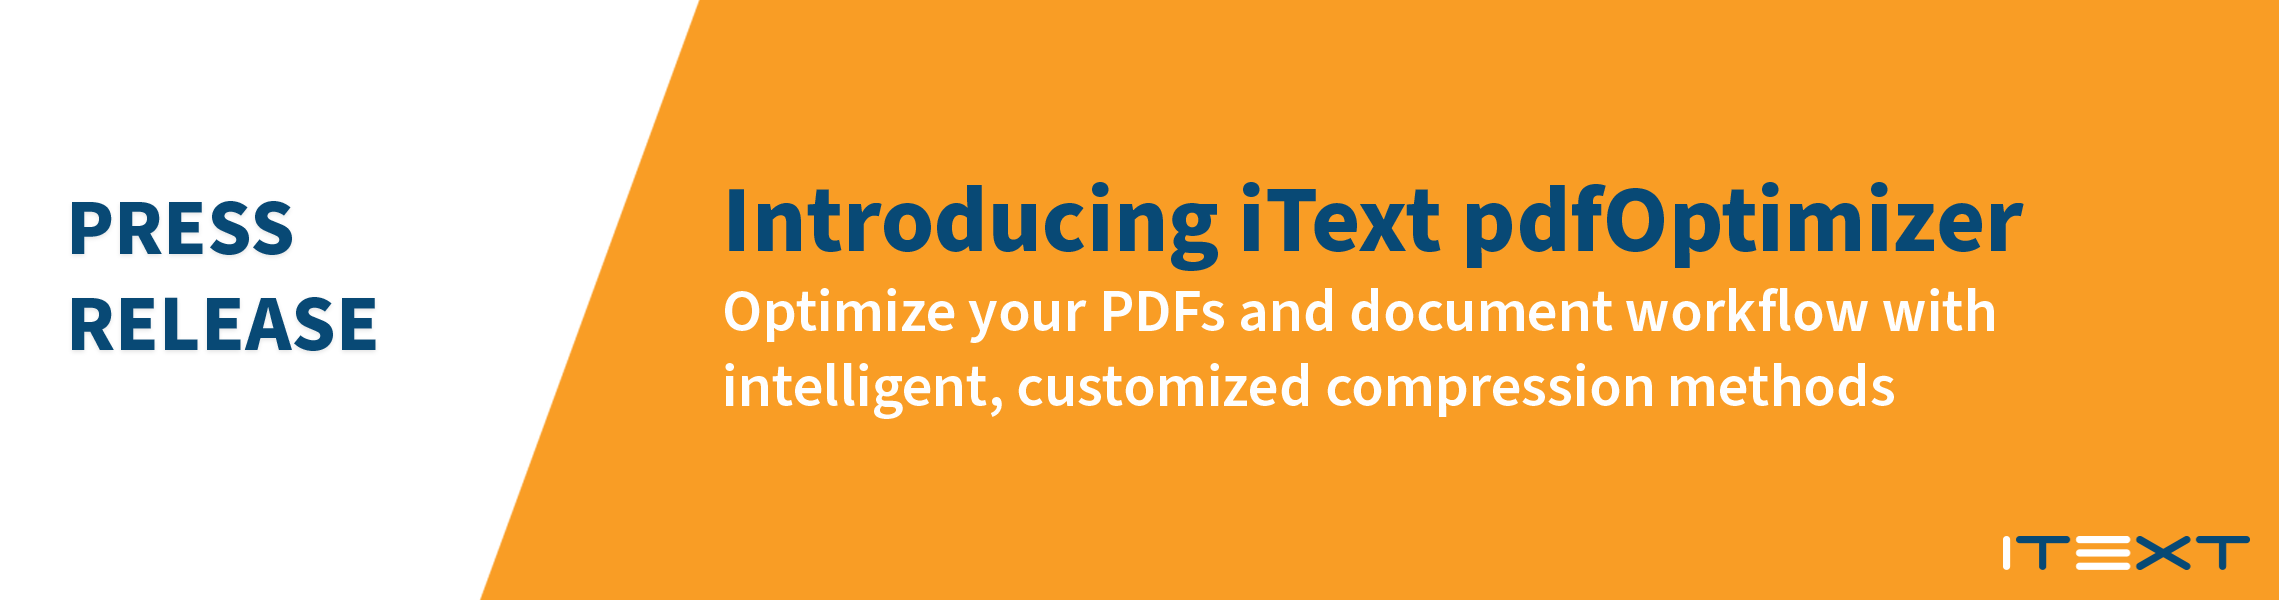 press release introducing iText pdfOptimizer